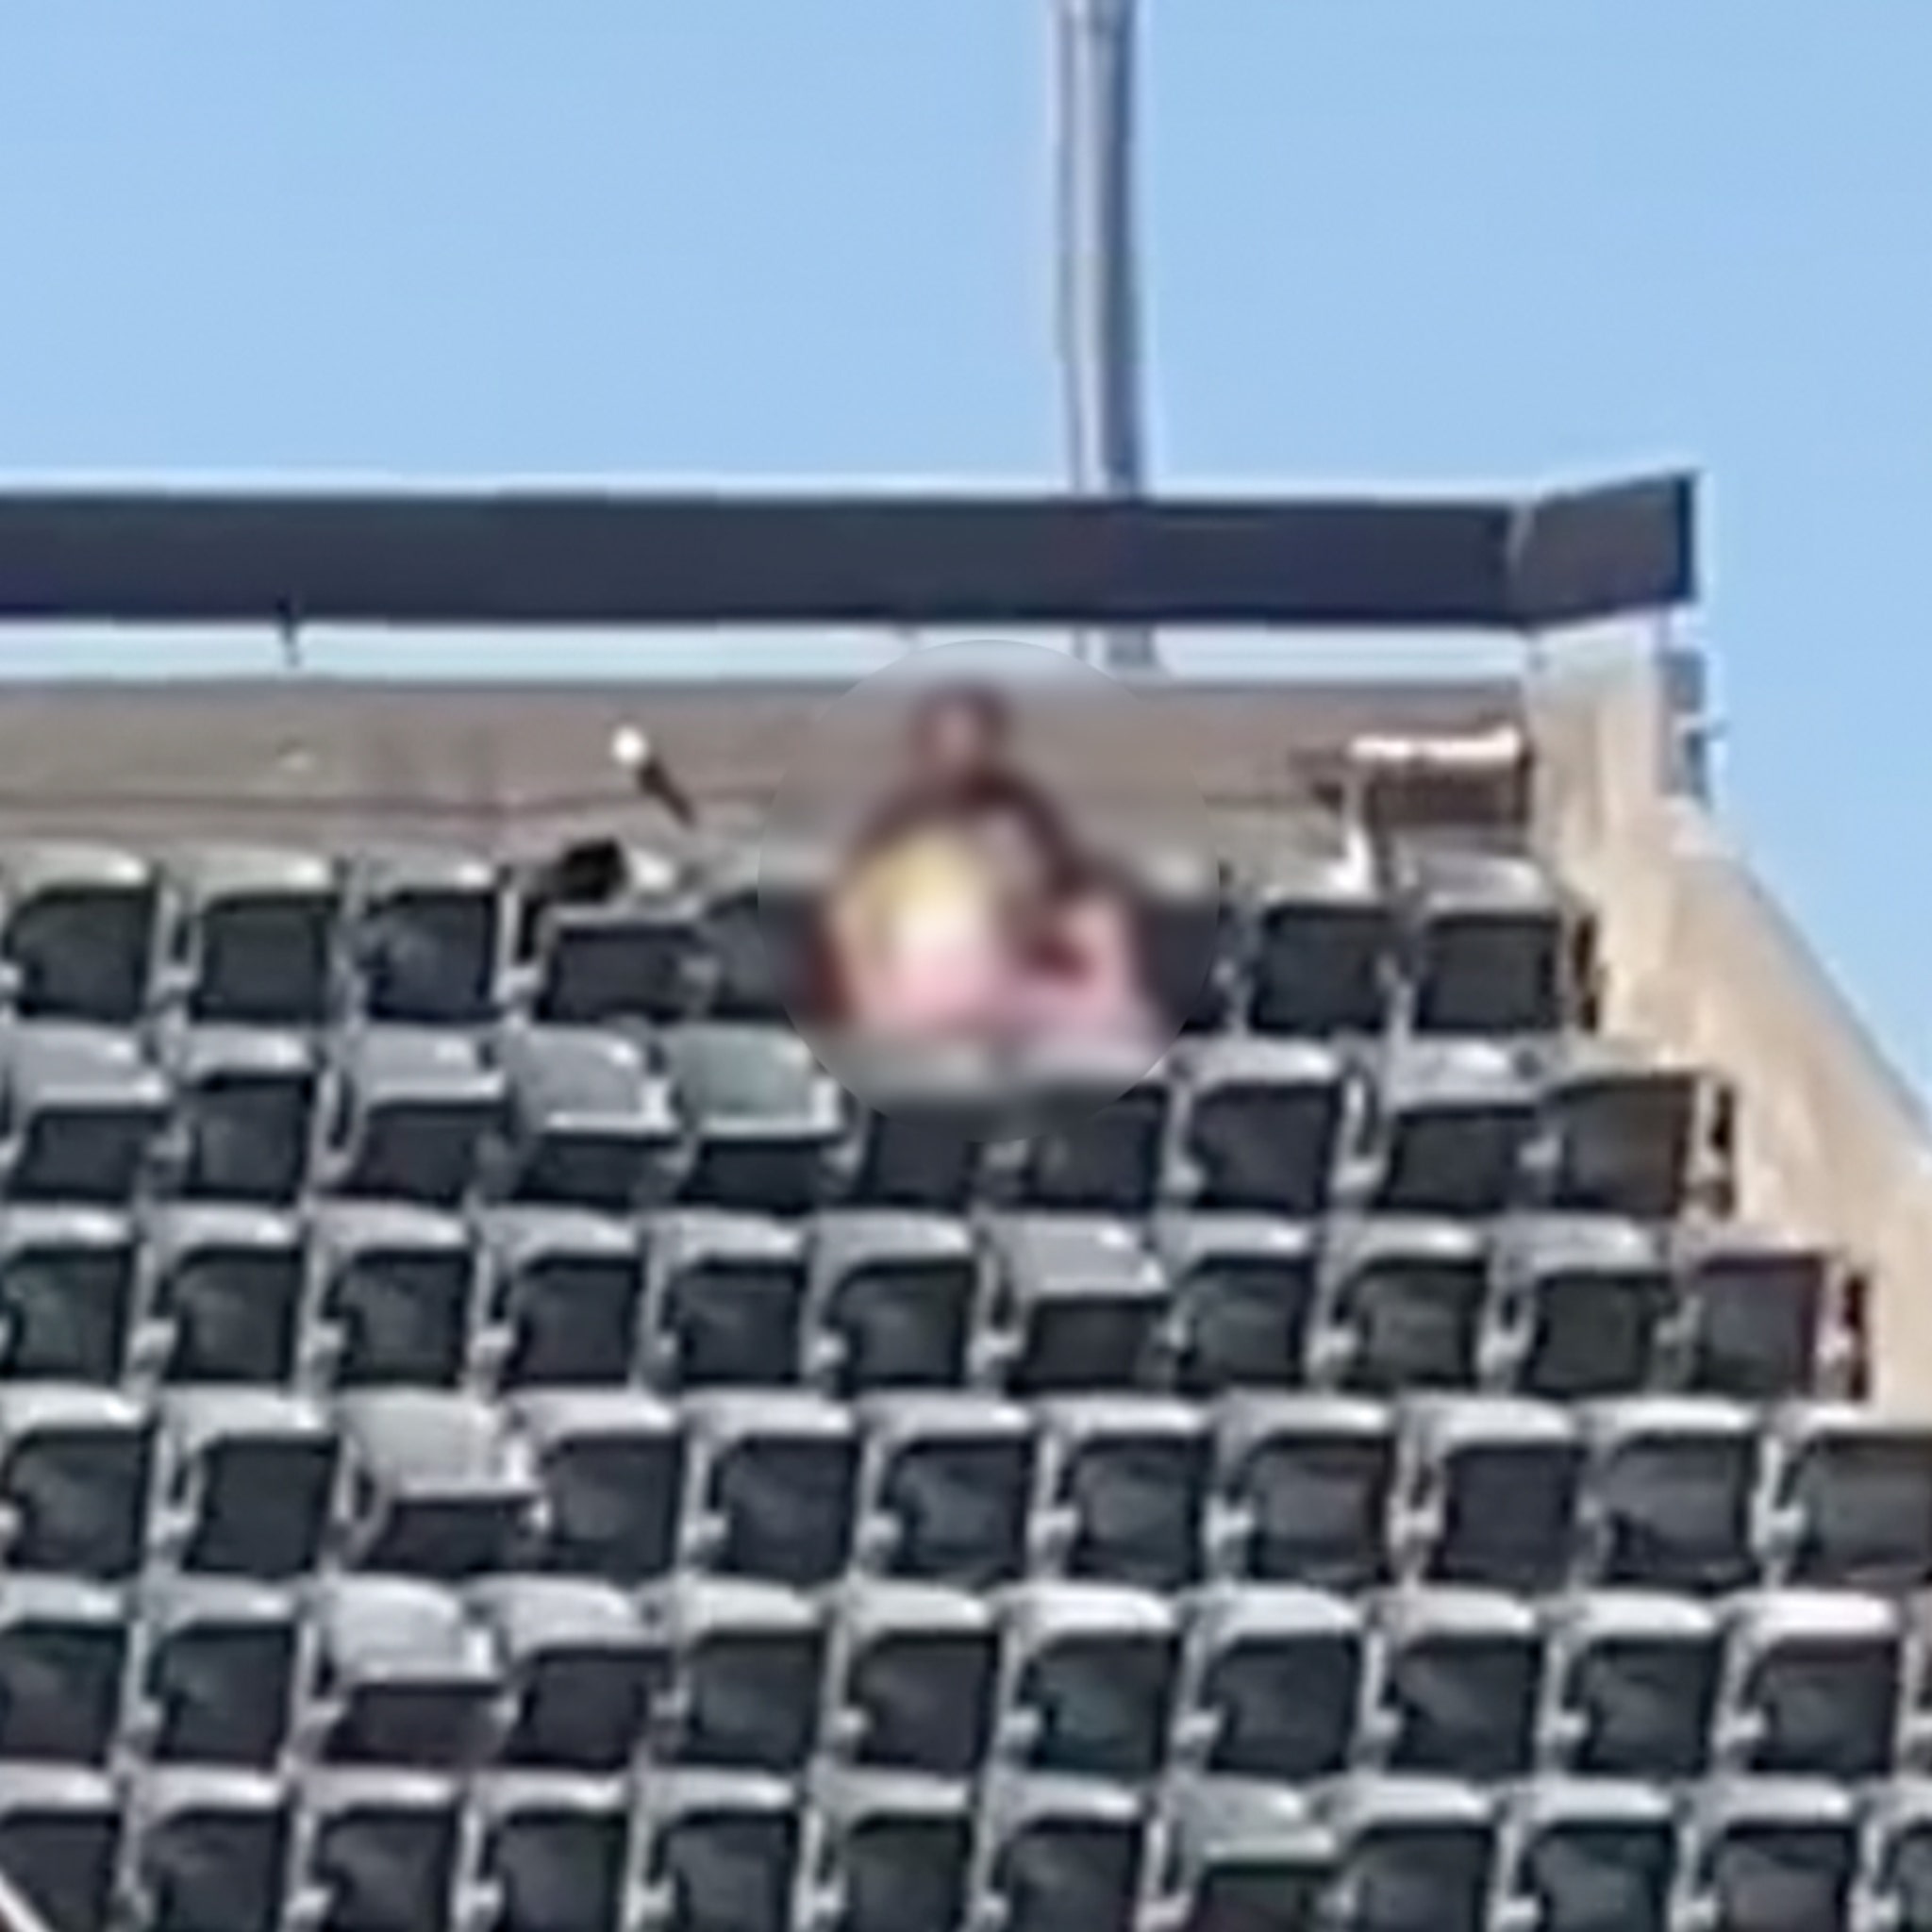 Cops Investigating Alleged Sex Act In Stands At Oakland As Game image photo picture